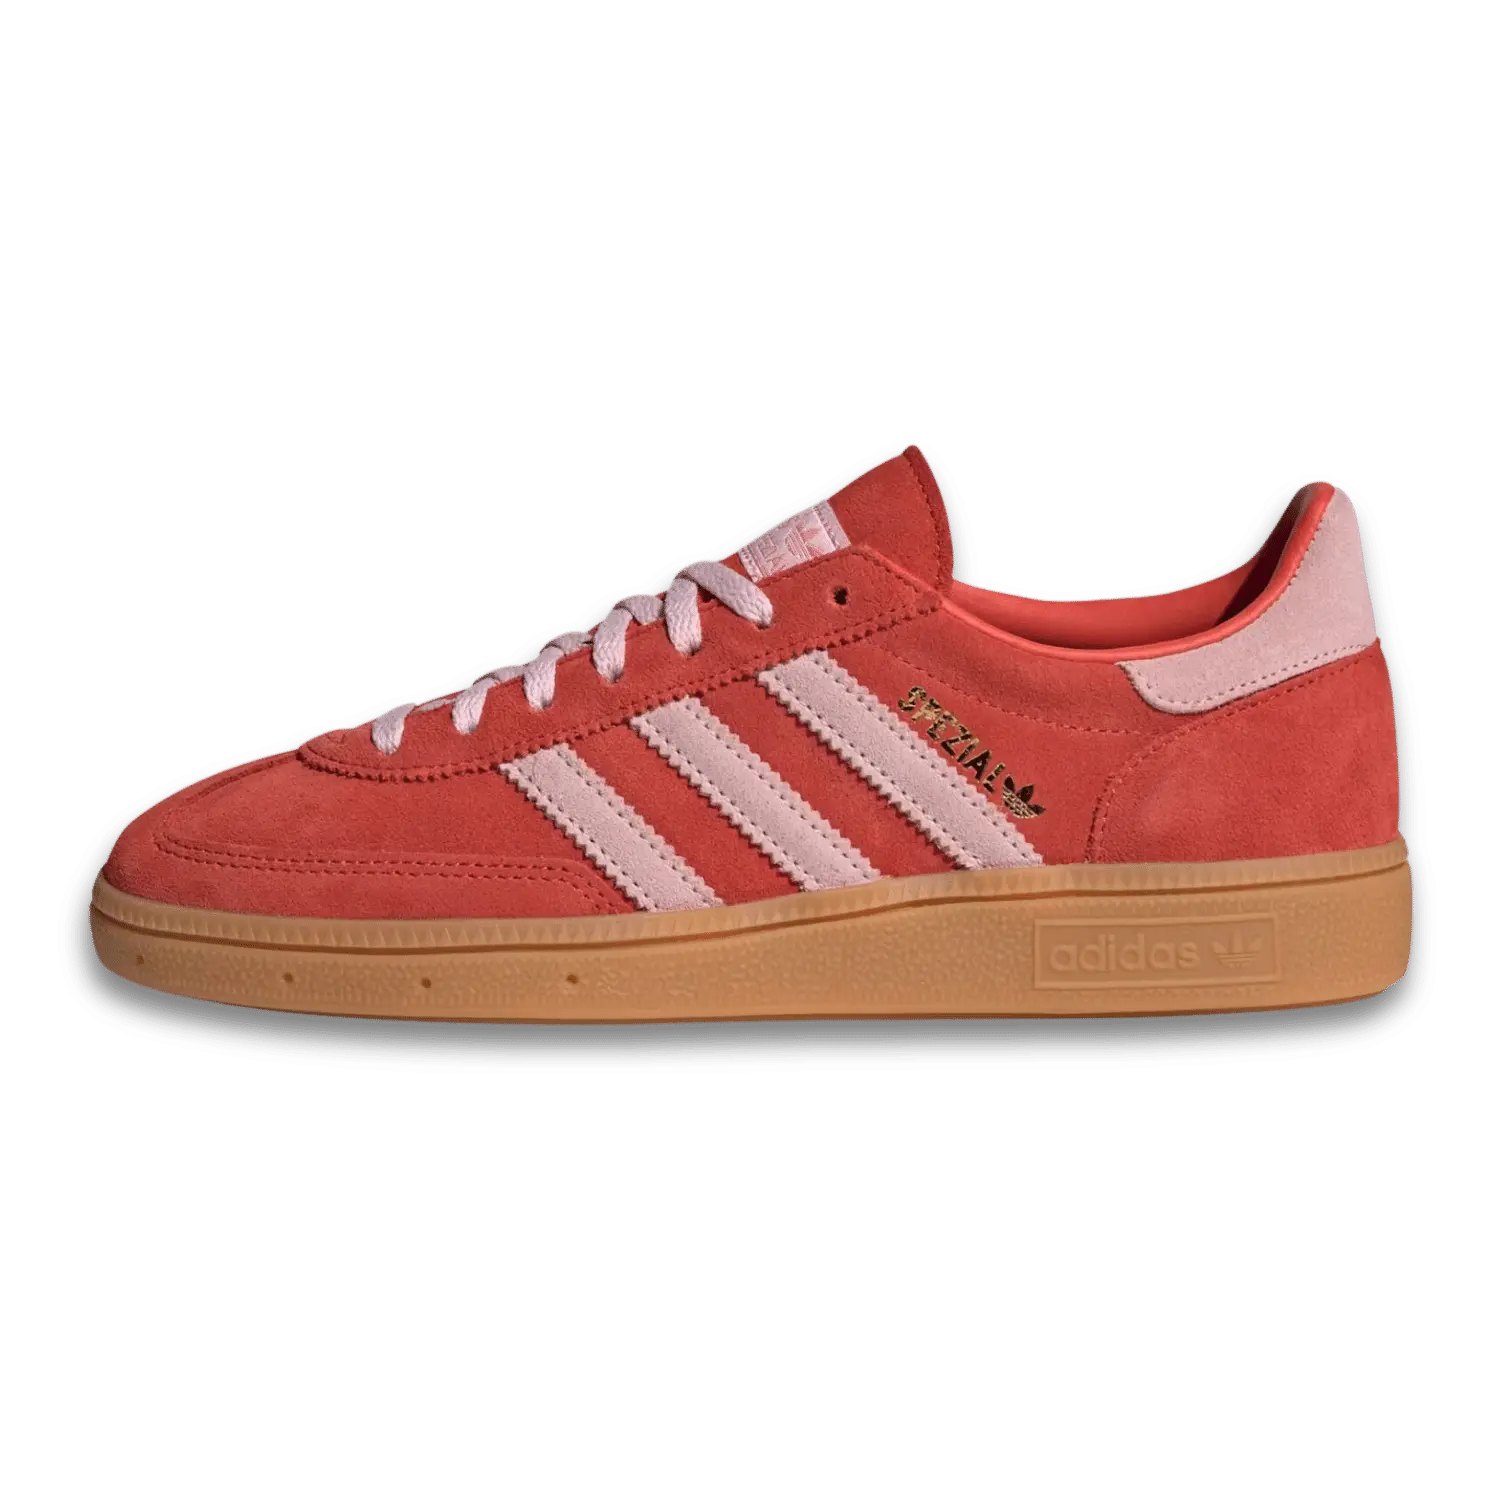 Adidas Handball Spezial Bright Red Clear Pink (W) - Sneakerterritory; Sneaker Territory; Handball Spezial rot pink